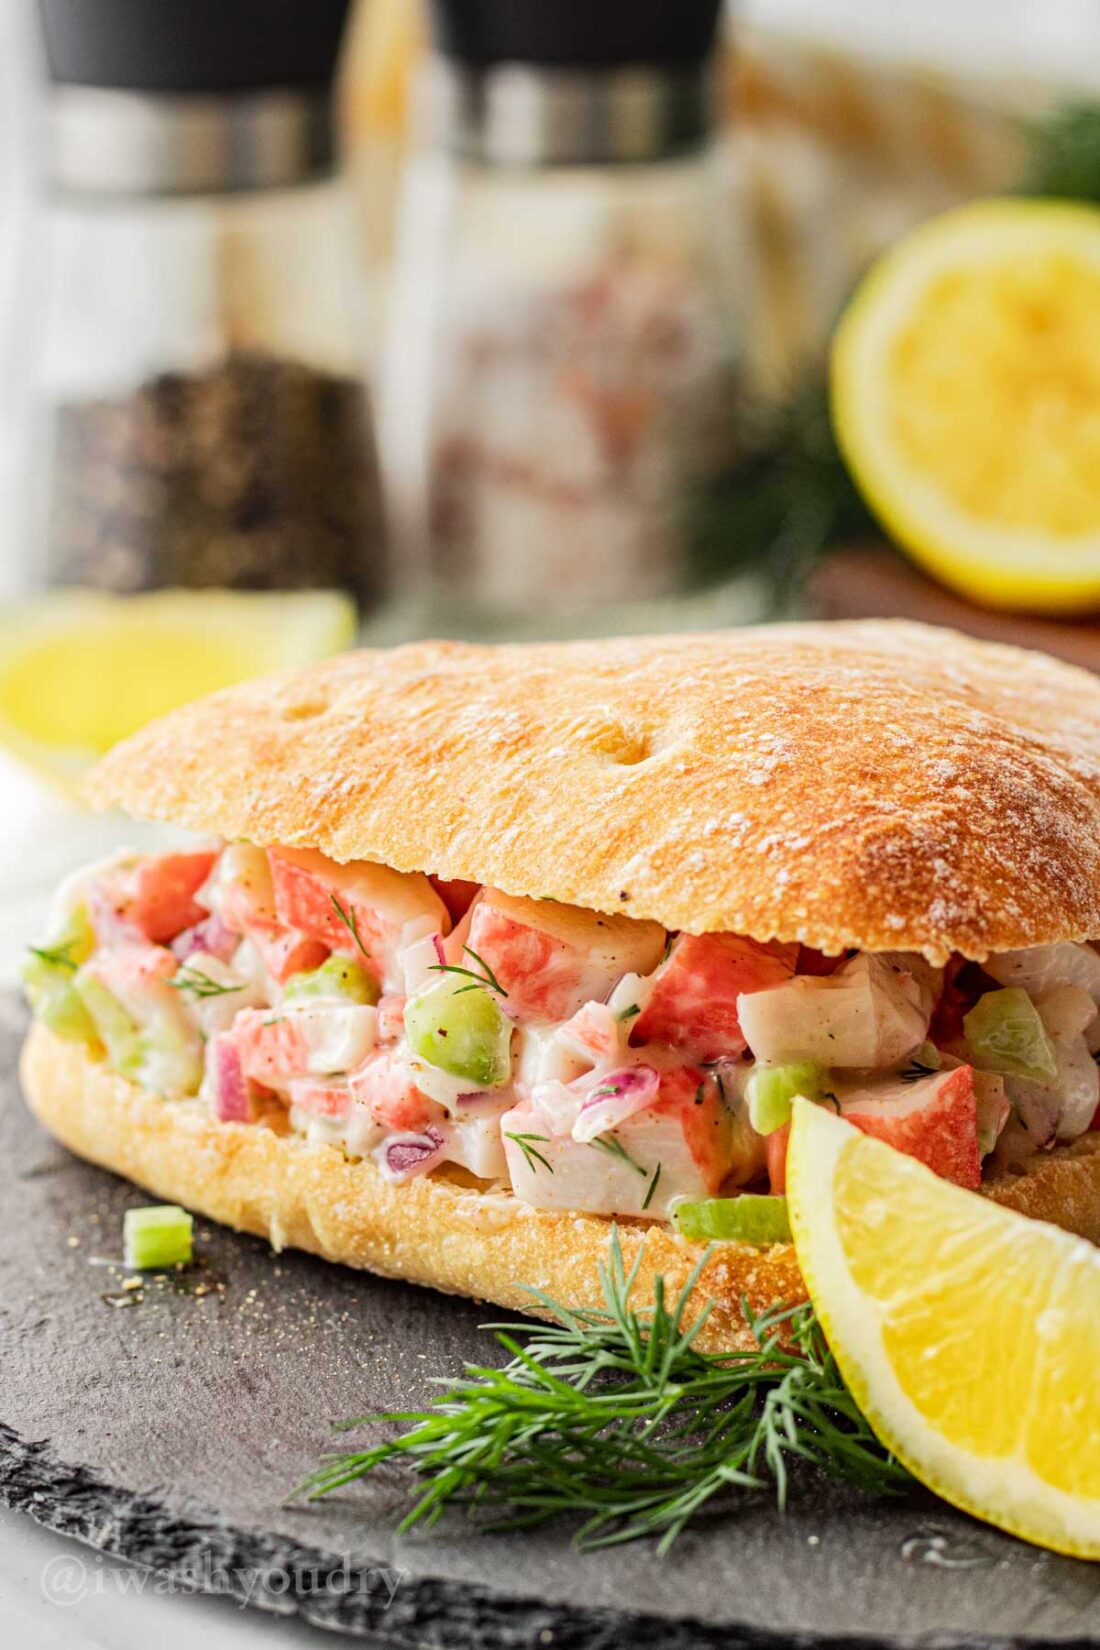 creamy crab salad on a roll with lemon wedge.